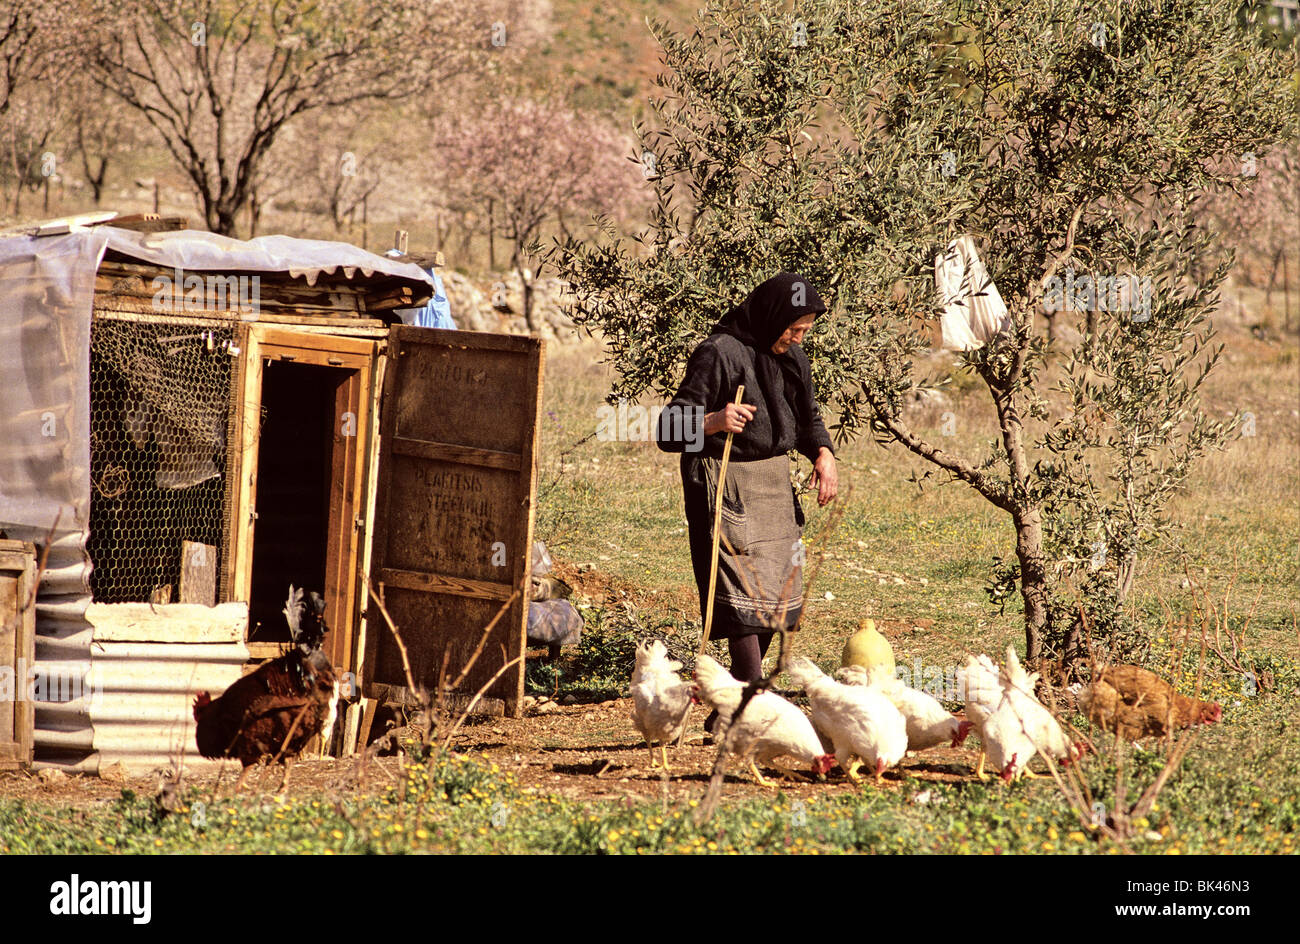 Woman near a henhouse tending to a flock of chickens, Greece Stock Photo